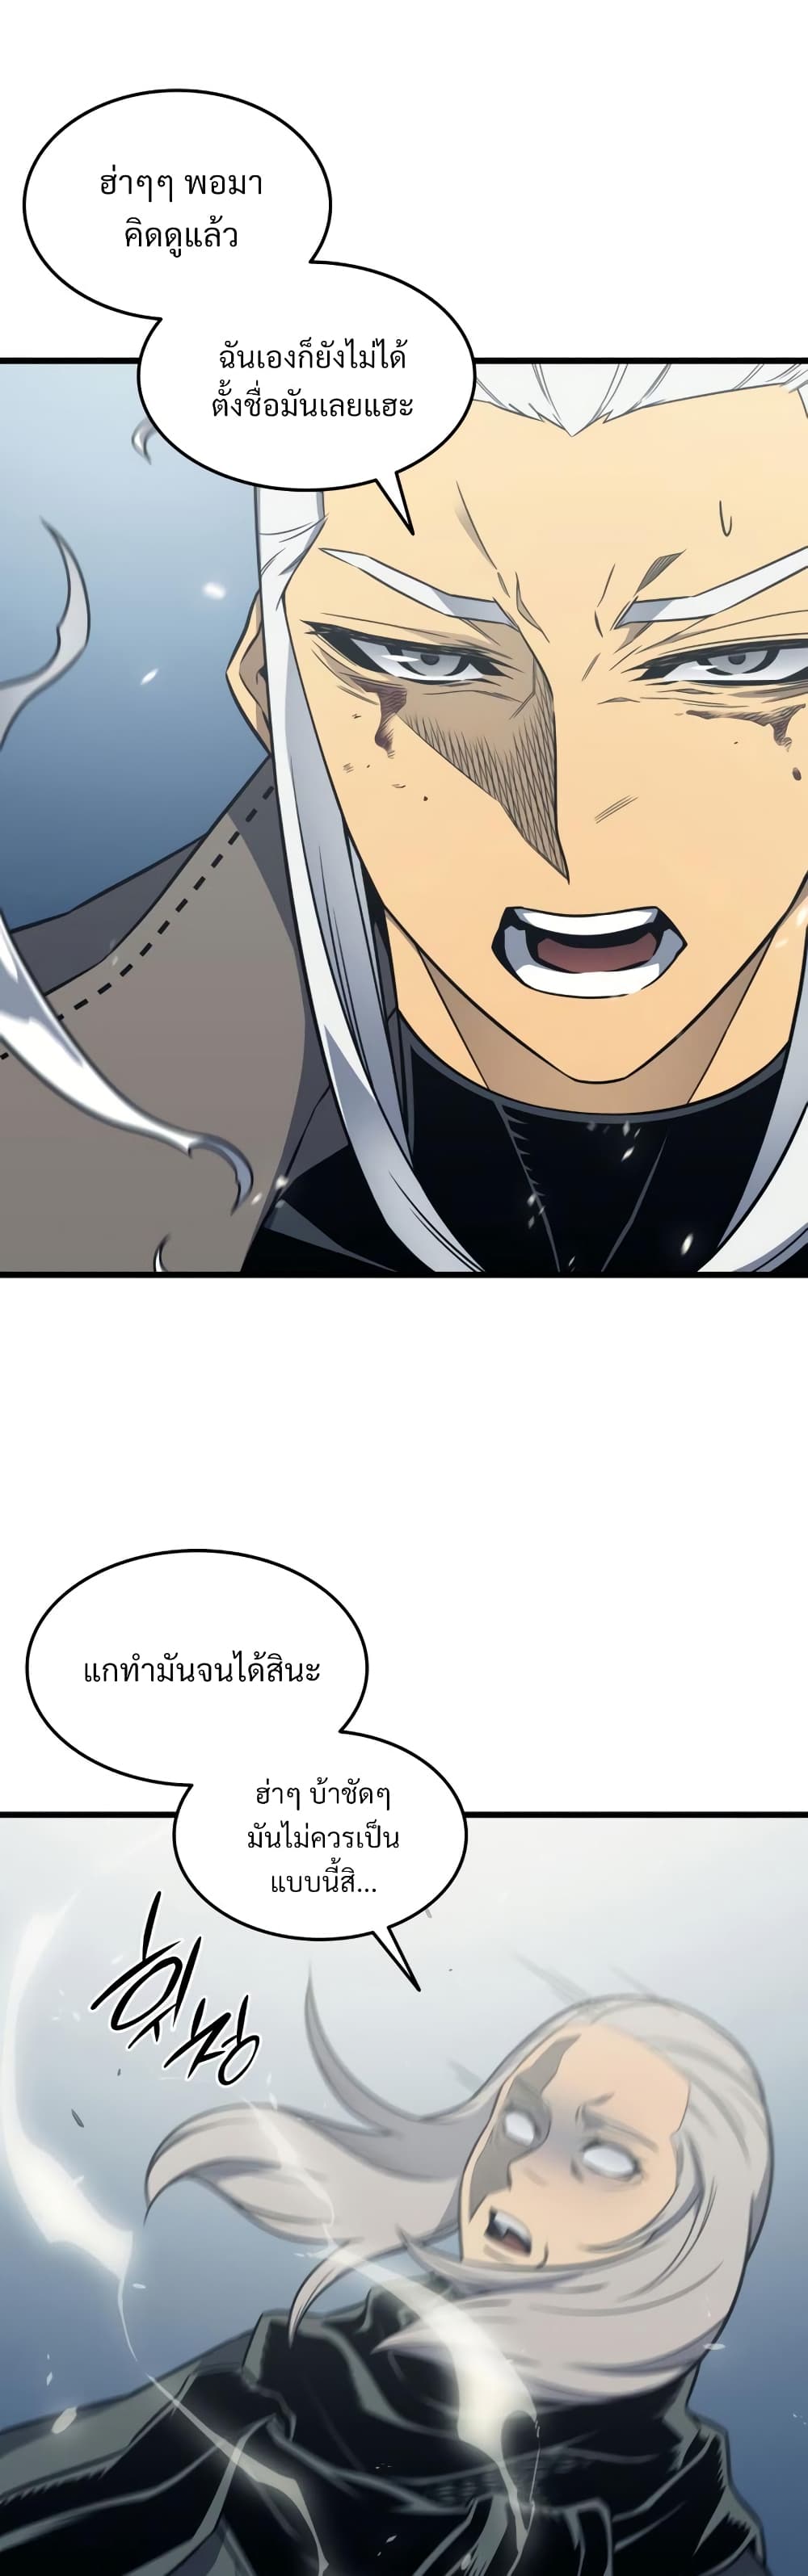 The Great Mage Returns After 4000 Years 123 แปลไทย